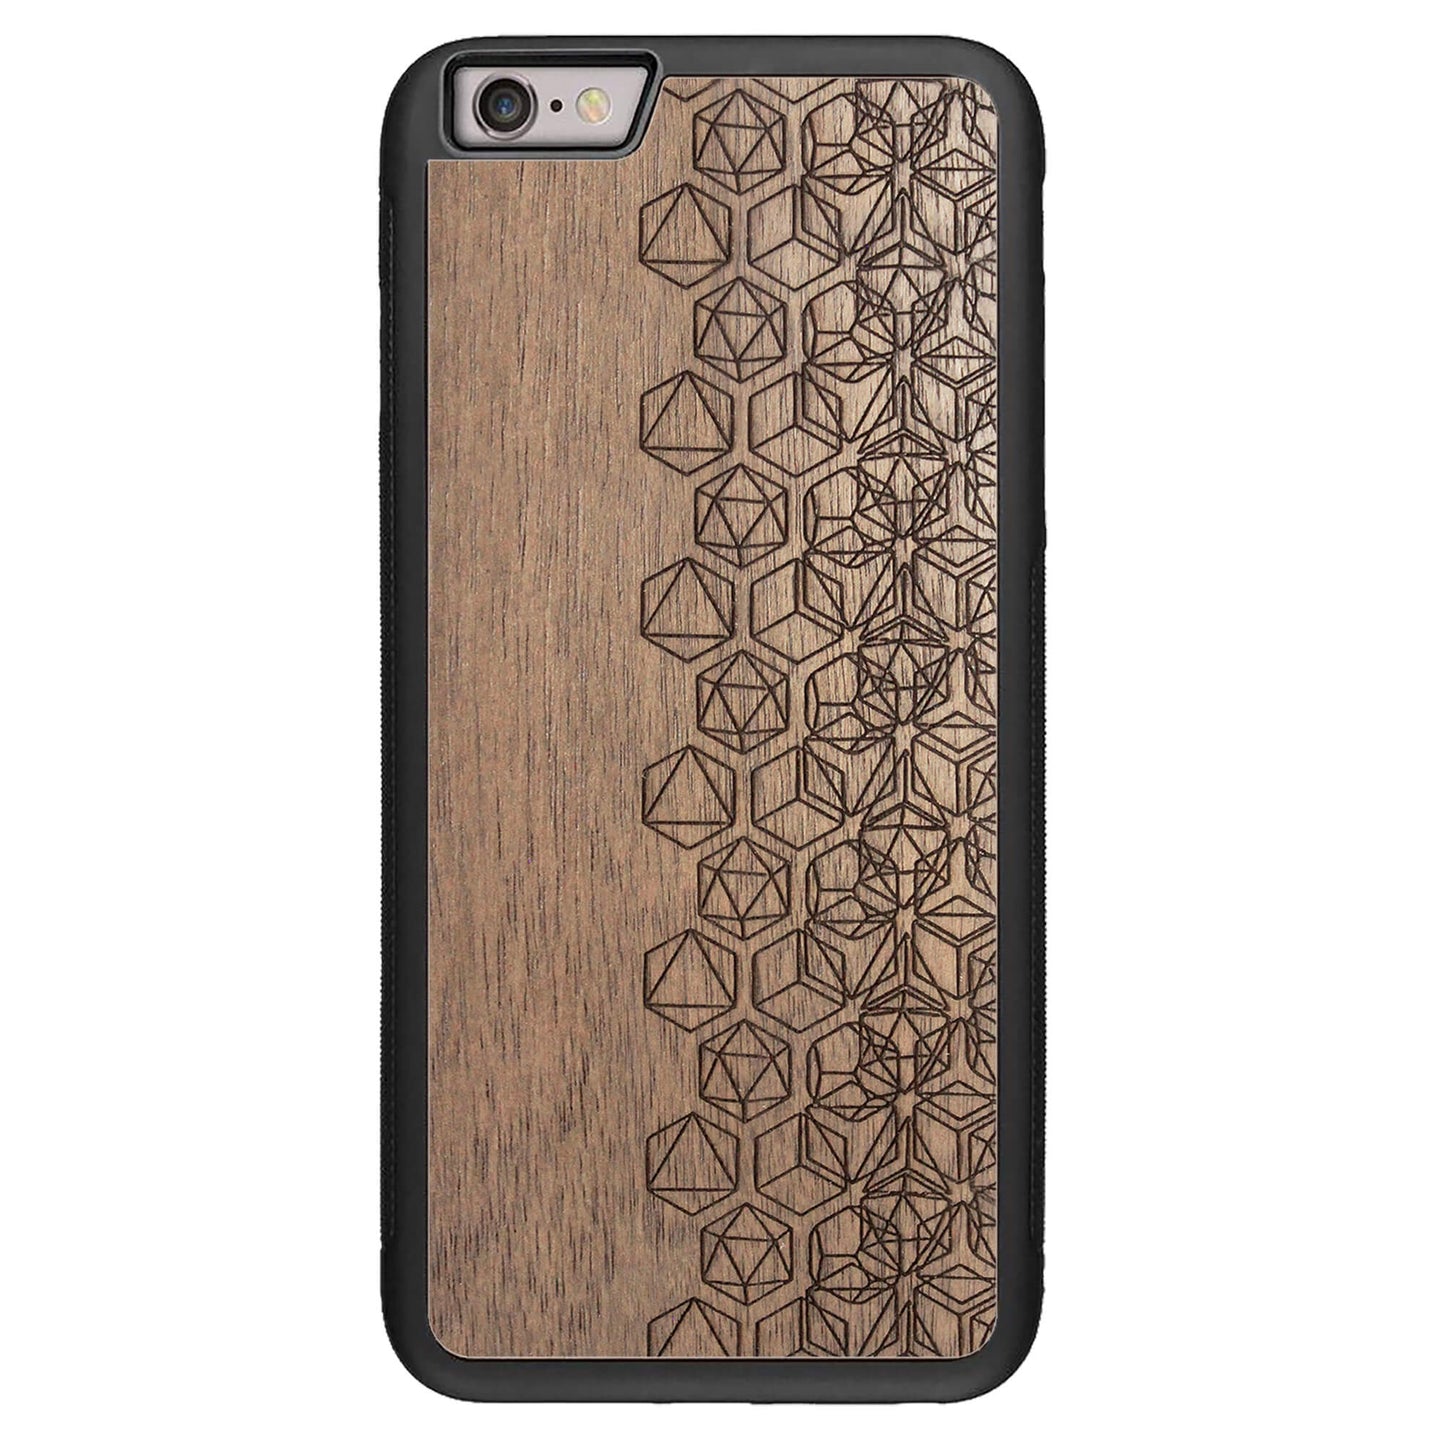 Wooden Case for iPhone 6/6S Plus Geometric